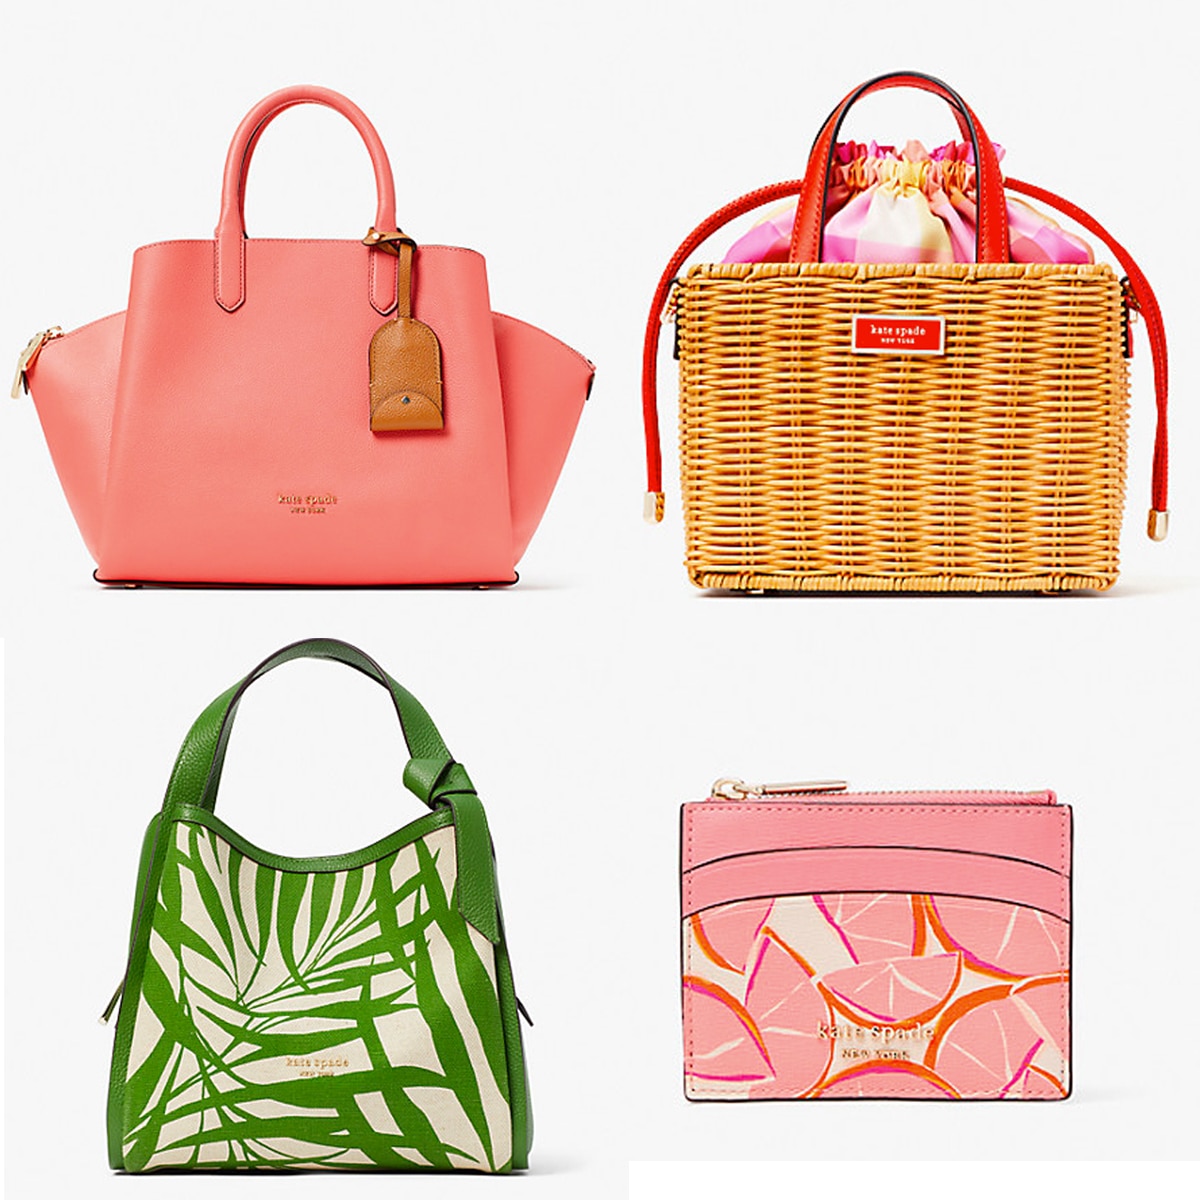 Kate Spade's End-of-Season Sale Is Up to 70% Off